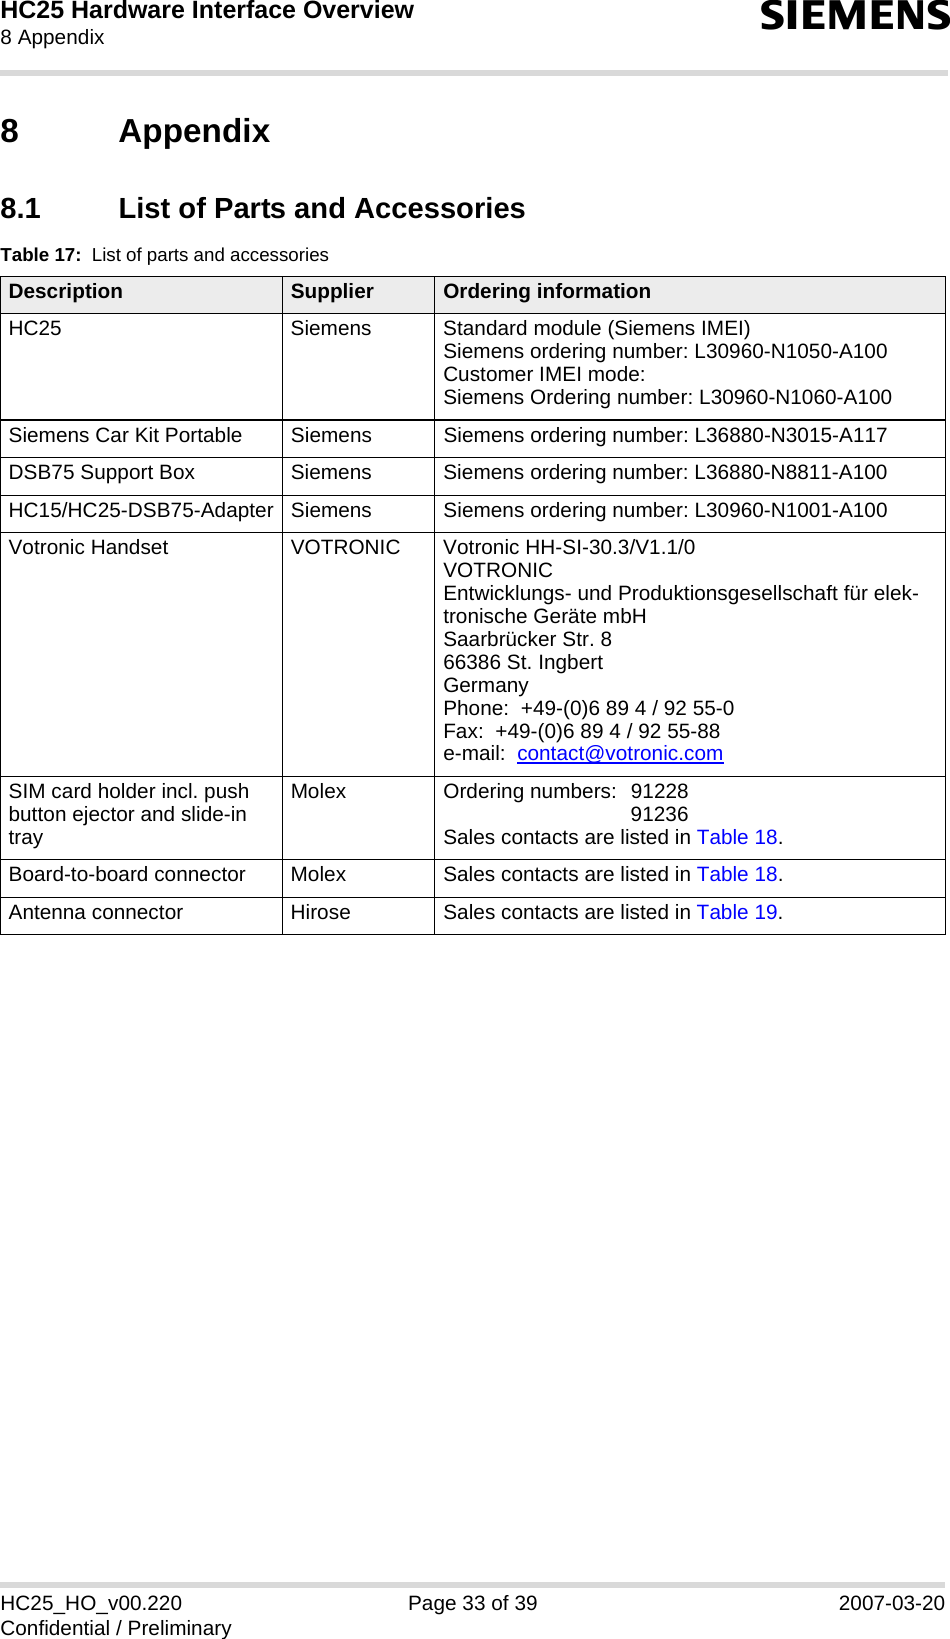 HC25 Hardware Interface Overview8 Appendix39sHC25_HO_v00.220 Page 33 of 39 2007-03-20Confidential / Preliminary8 Appendix8.1 List of Parts and AccessoriesTable 17:  List of parts and accessoriesDescription Supplier Ordering informationHC25 Siemens Standard module (Siemens IMEI)Siemens ordering number: L30960-N1050-A100Customer IMEI mode:Siemens Ordering number: L30960-N1060-A100Siemens Car Kit Portable Siemens Siemens ordering number: L36880-N3015-A117DSB75 Support Box Siemens Siemens ordering number: L36880-N8811-A100HC15/HC25-DSB75-Adapter Siemens Siemens ordering number: L30960-N1001-A100Votronic Handset VOTRONIC Votronic HH-SI-30.3/V1.1/0VOTRONIC Entwicklungs- und Produktionsgesellschaft für elek-tronische Geräte mbHSaarbrücker Str. 866386 St. IngbertGermanyPhone:  +49-(0)6 89 4 / 92 55-0Fax:  +49-(0)6 89 4 / 92 55-88e-mail:  contact@votronic.comSIM card holder incl. push button ejector and slide-in trayMolex Ordering numbers:  91228 91236Sales contacts are listed in Table 18.Board-to-board connector Molex Sales contacts are listed in Table 18.Antenna connector Hirose Sales contacts are listed in Table 19.